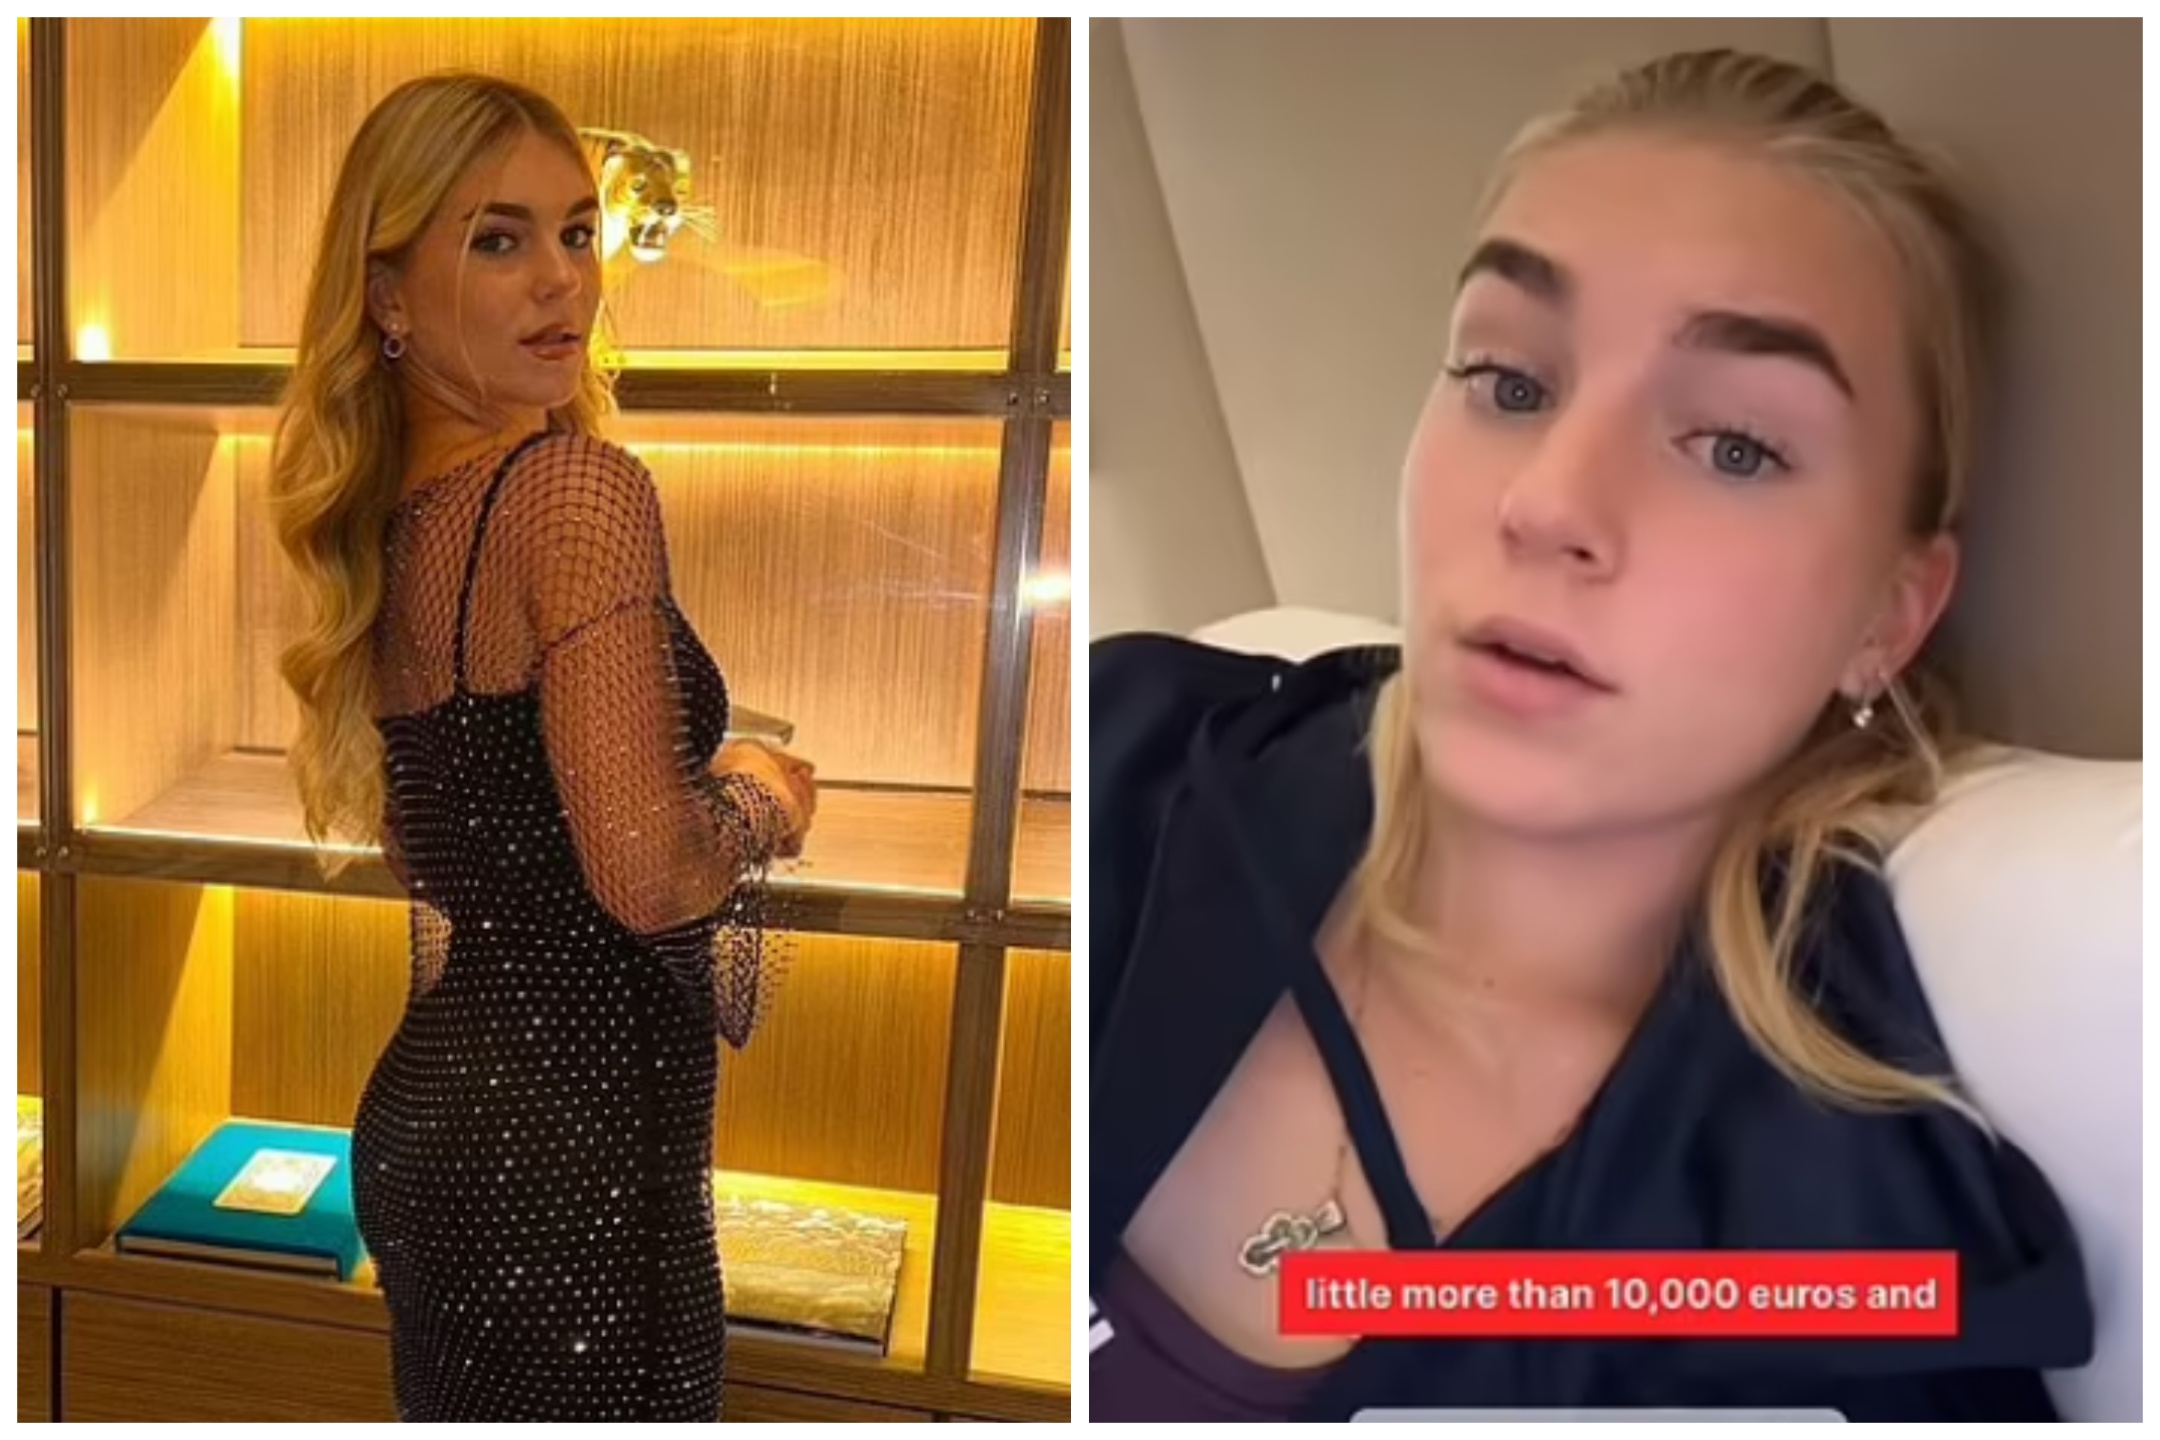 Russian tennis star Maria Timofeeva, 20, warns people visiting Spain to ‘be aware’ after top 100 player is robbed of 10,000 during the Madrid Open [Video]